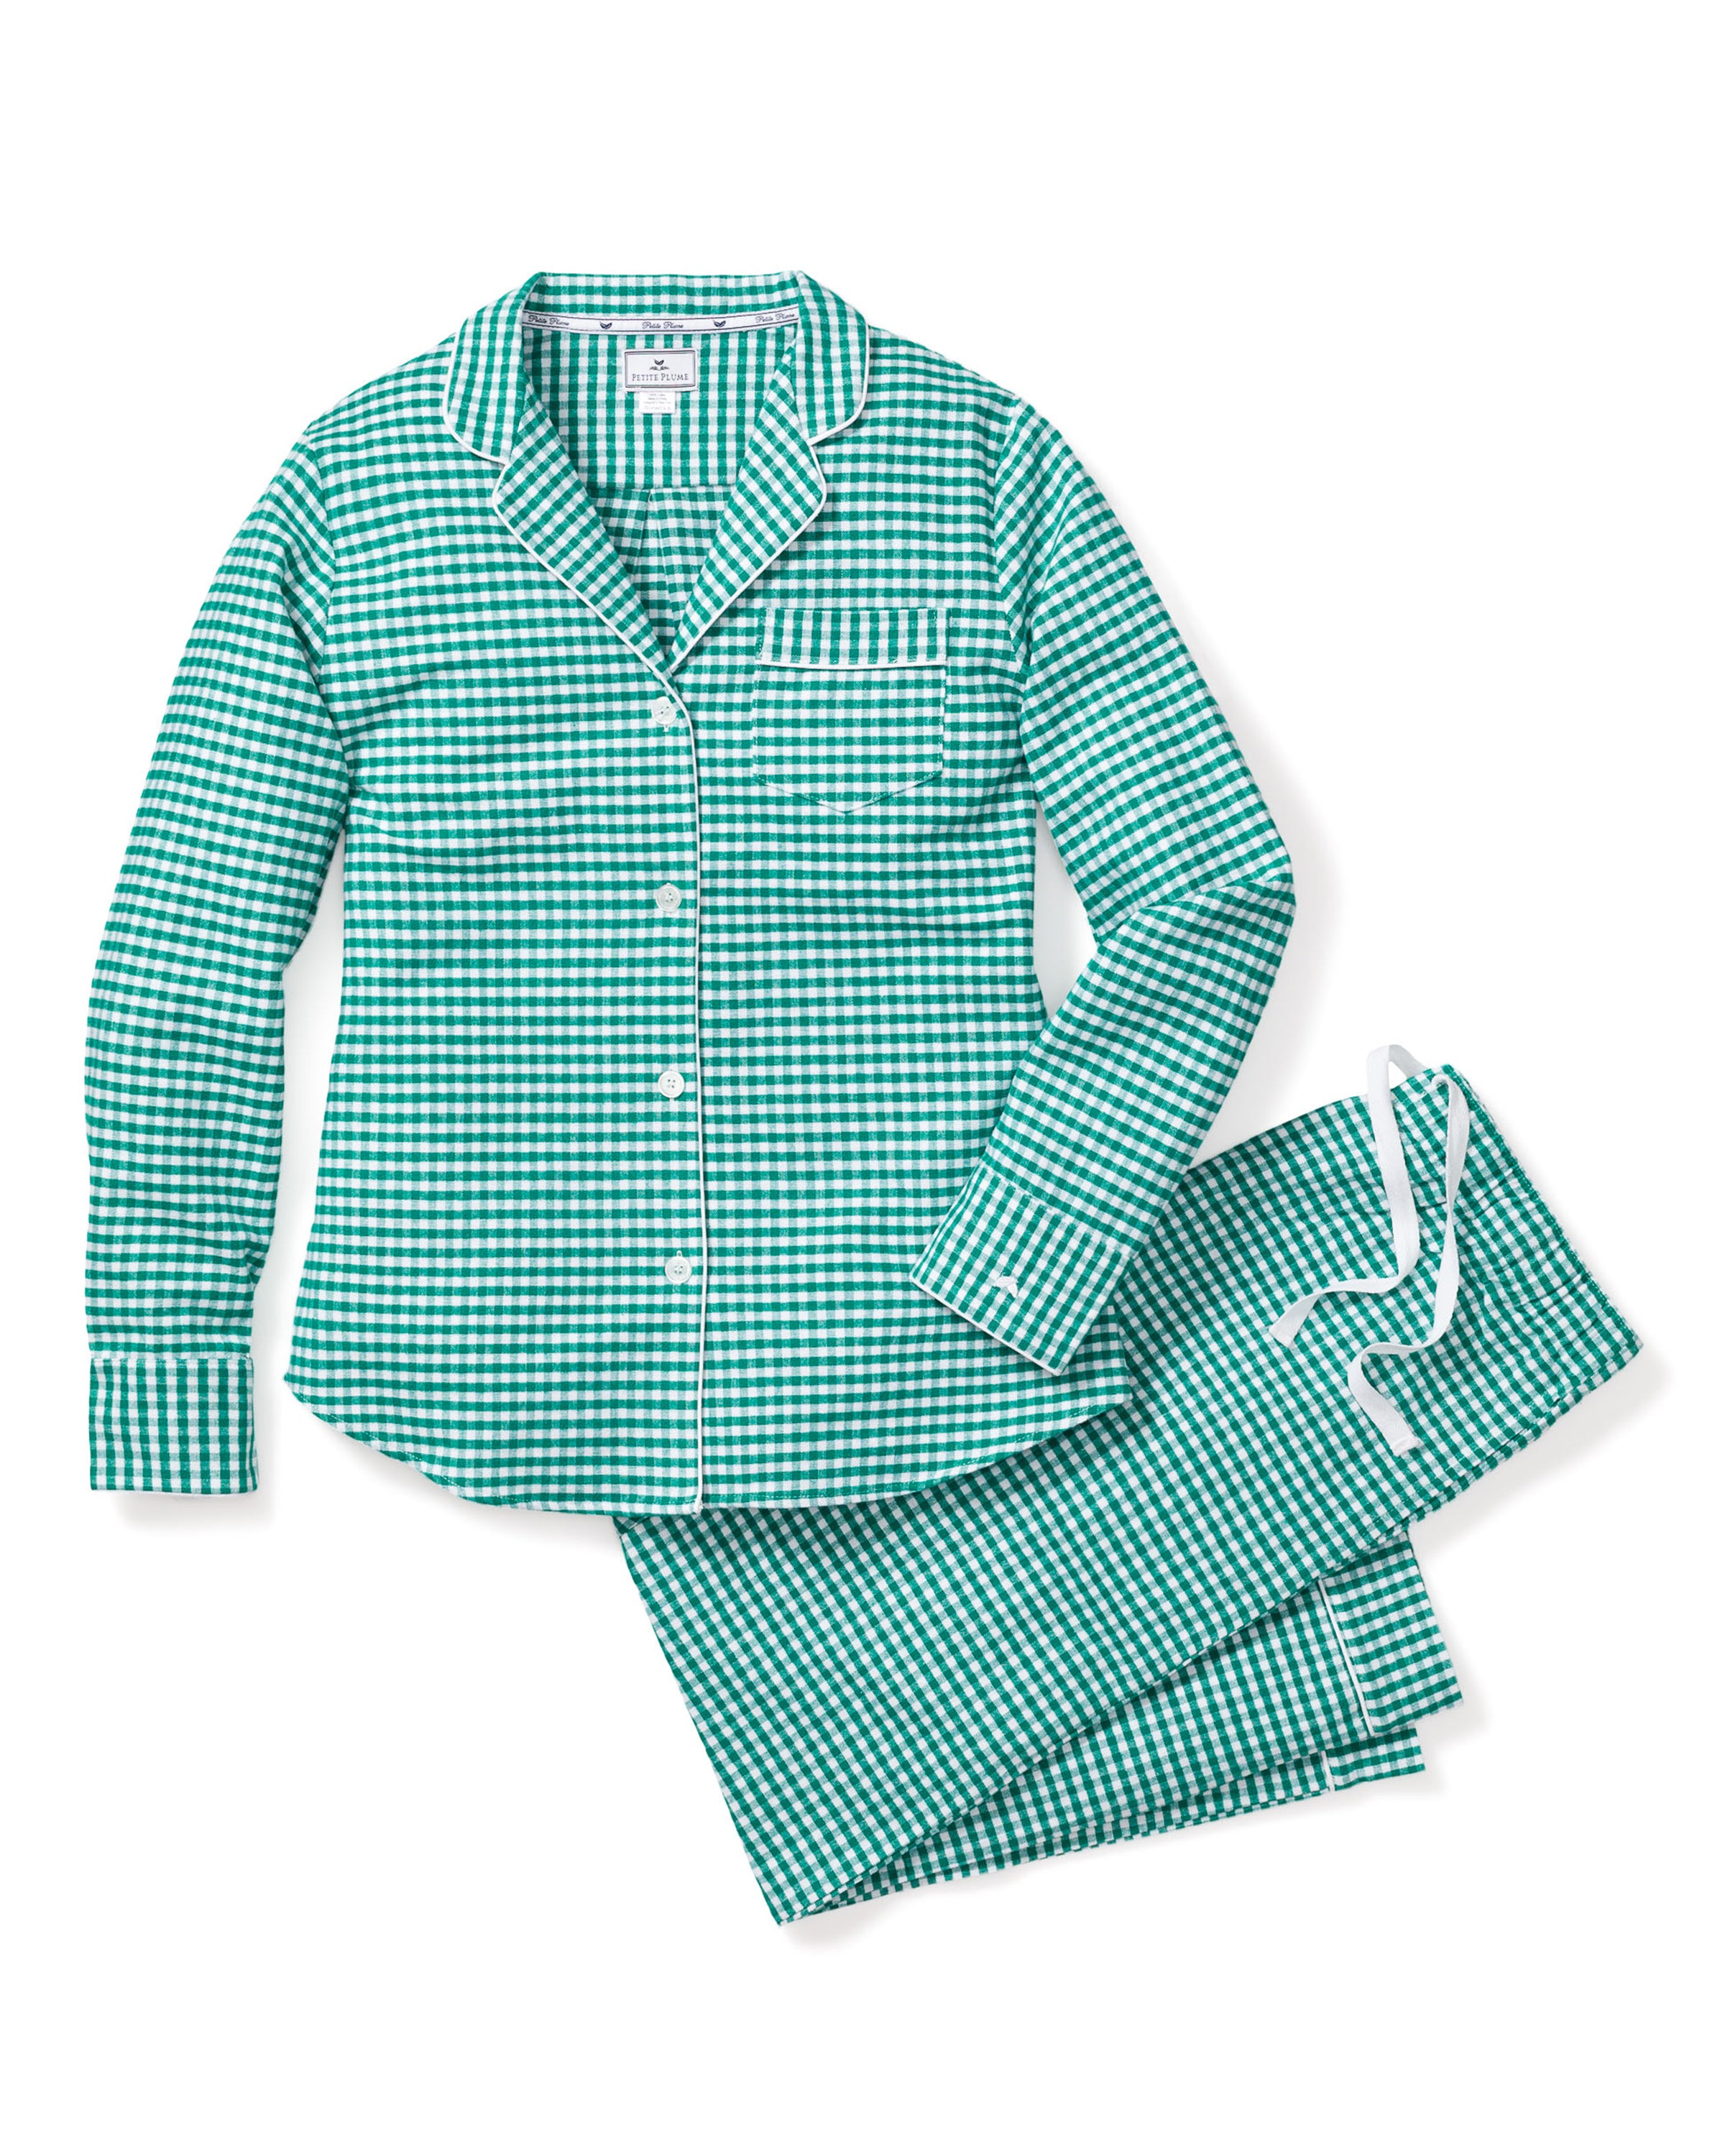 Women's Flannel Pajama Set in Green Gingham